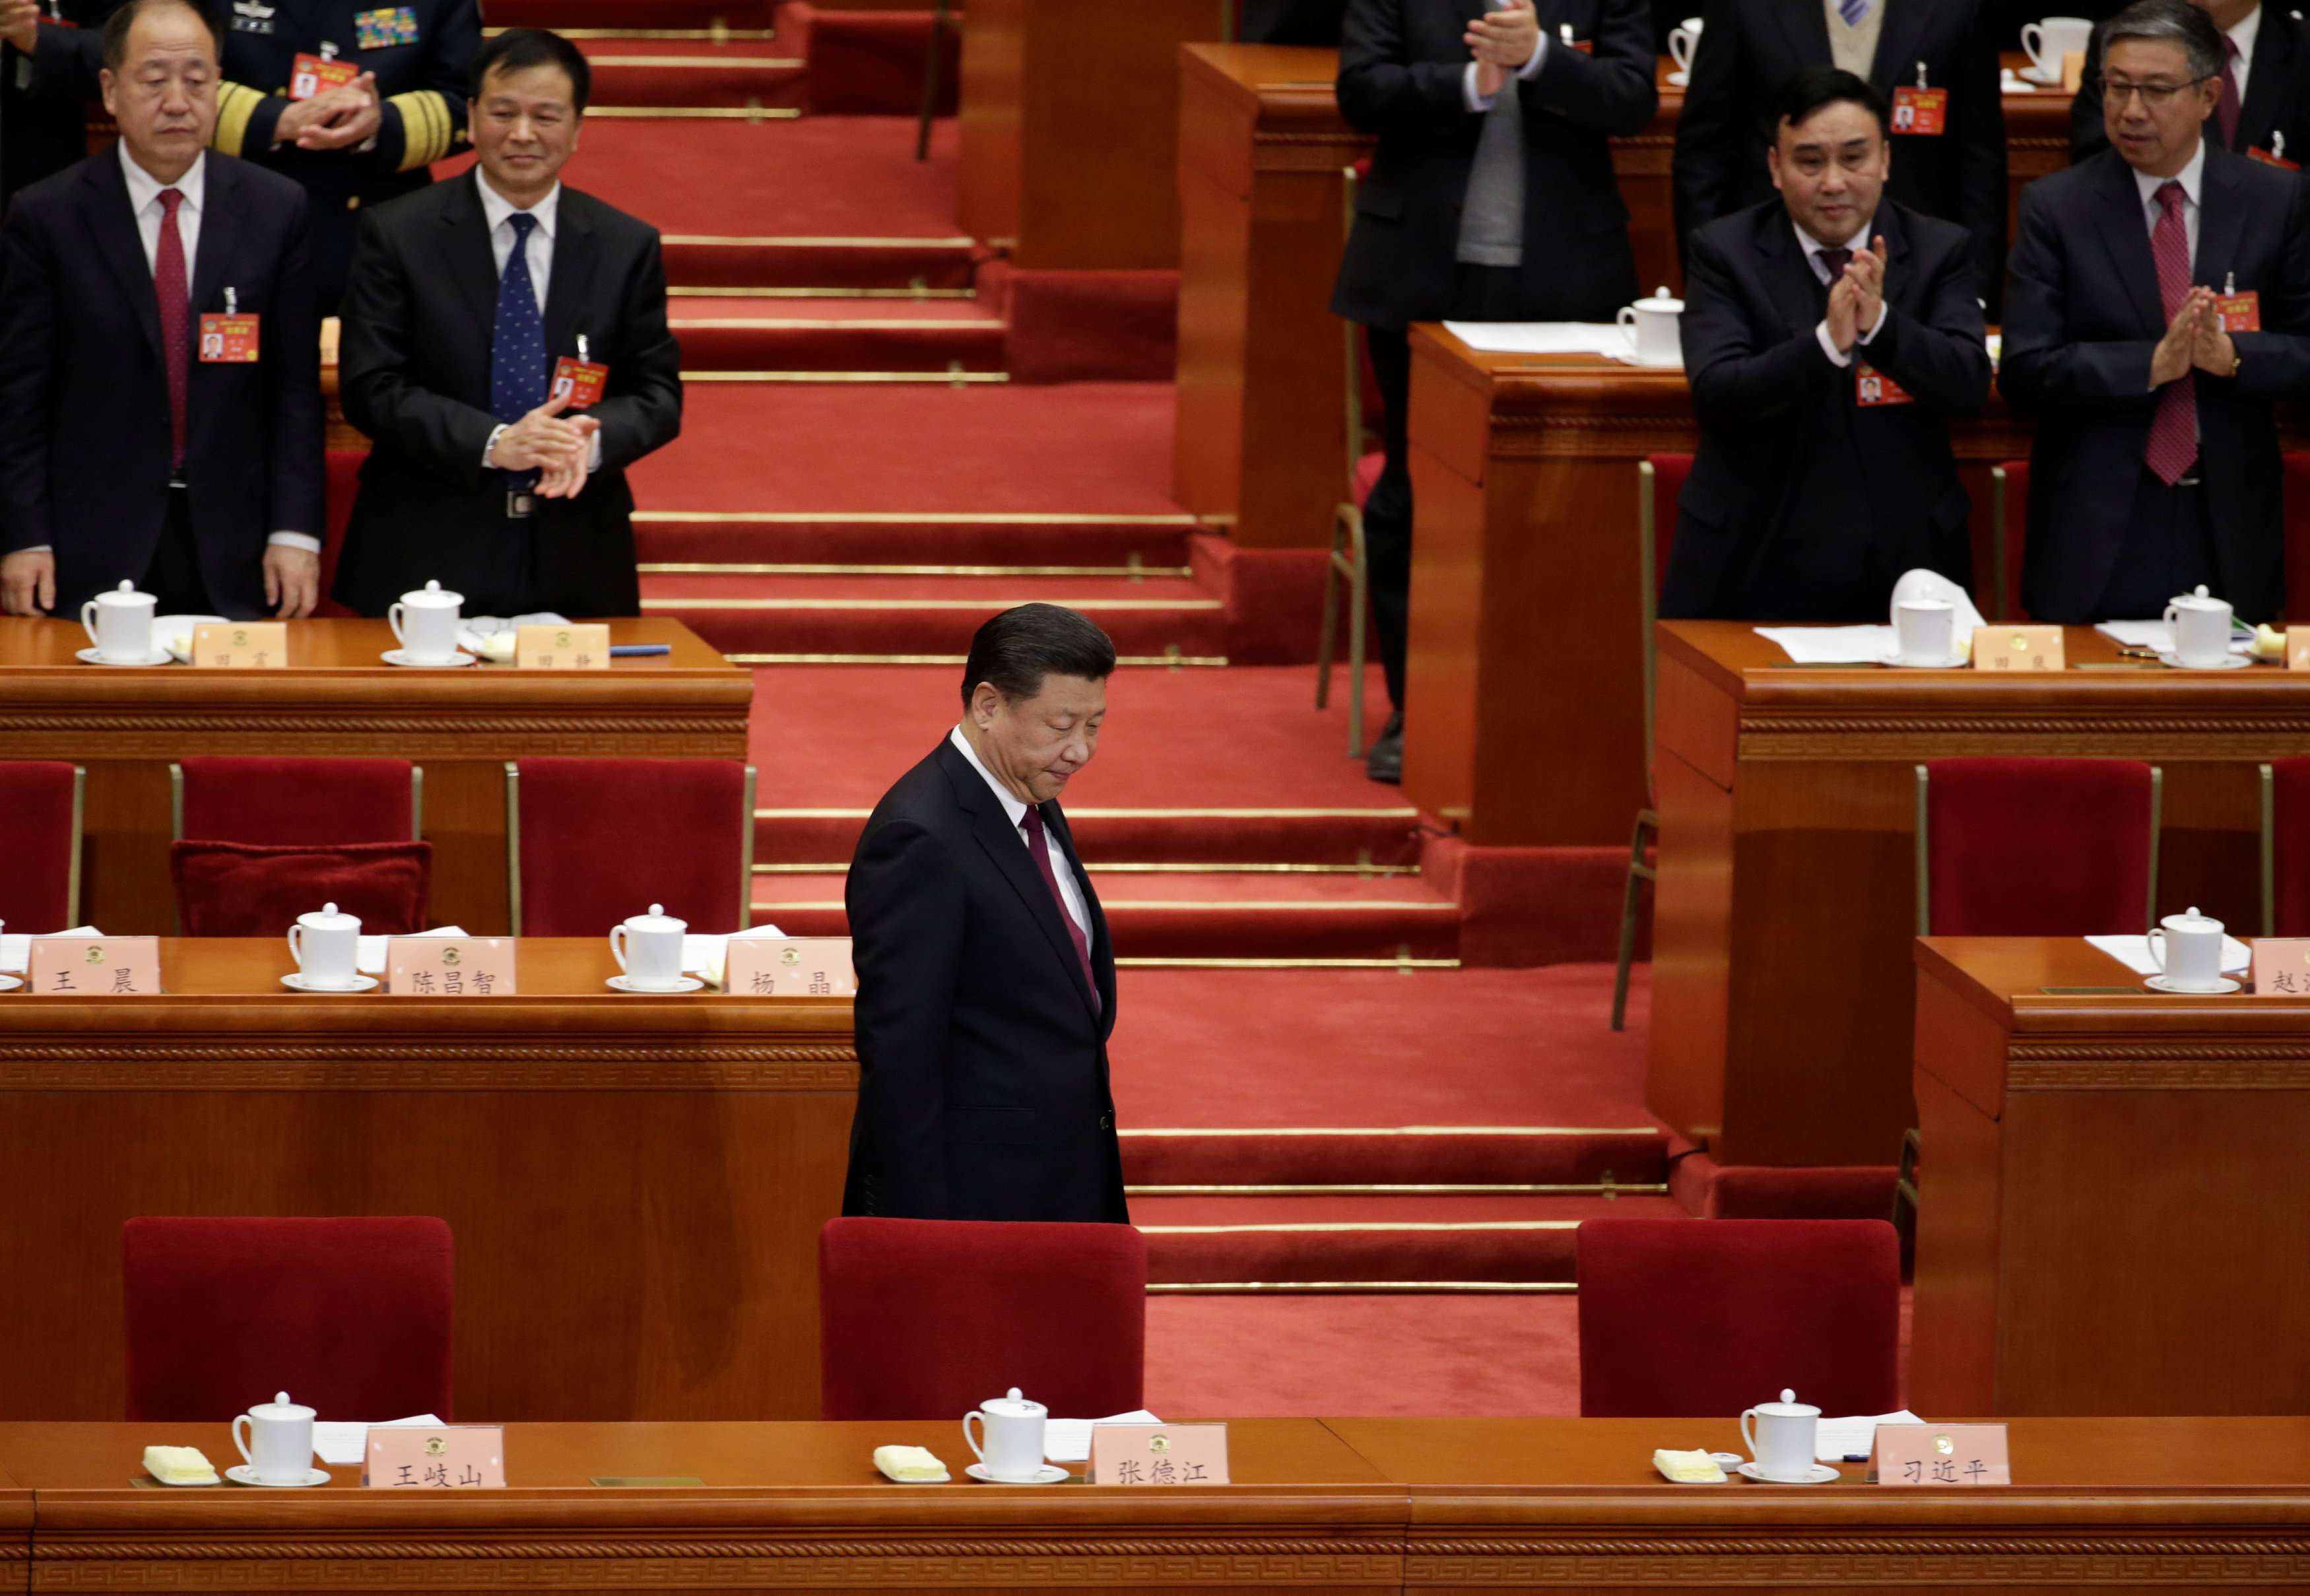 President Xi Jinping arrives for the opening session of the Chinese People's Political Consultative Conference at the Great Hall of the People in Beijing on Friday. Photo: Reuters